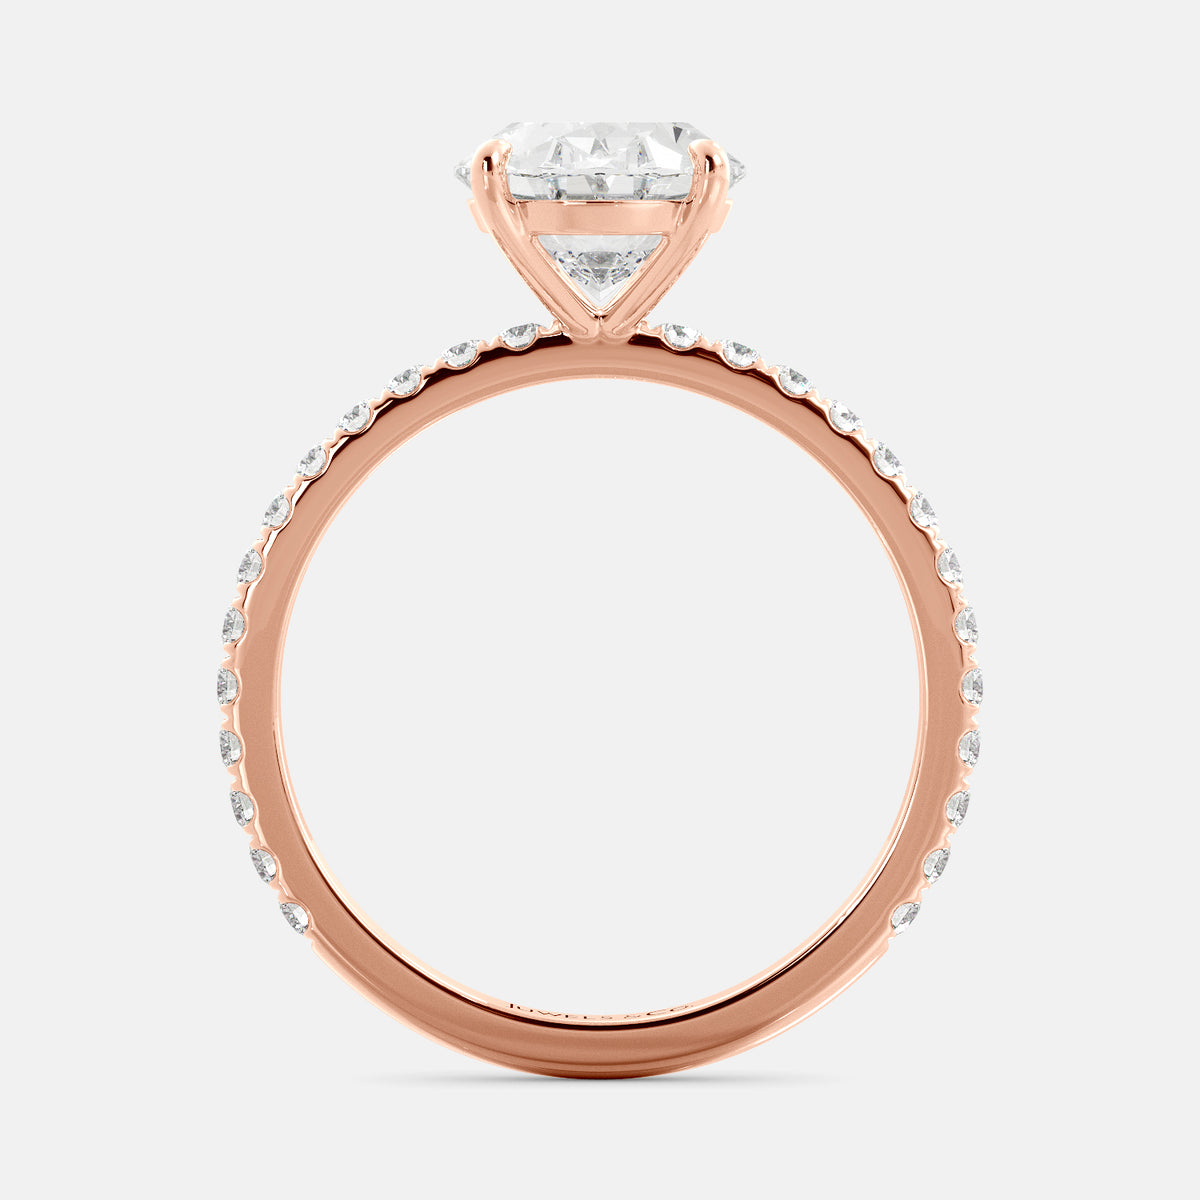 The Trendsetting Oval Solitaire Diamond Ring with Pavé